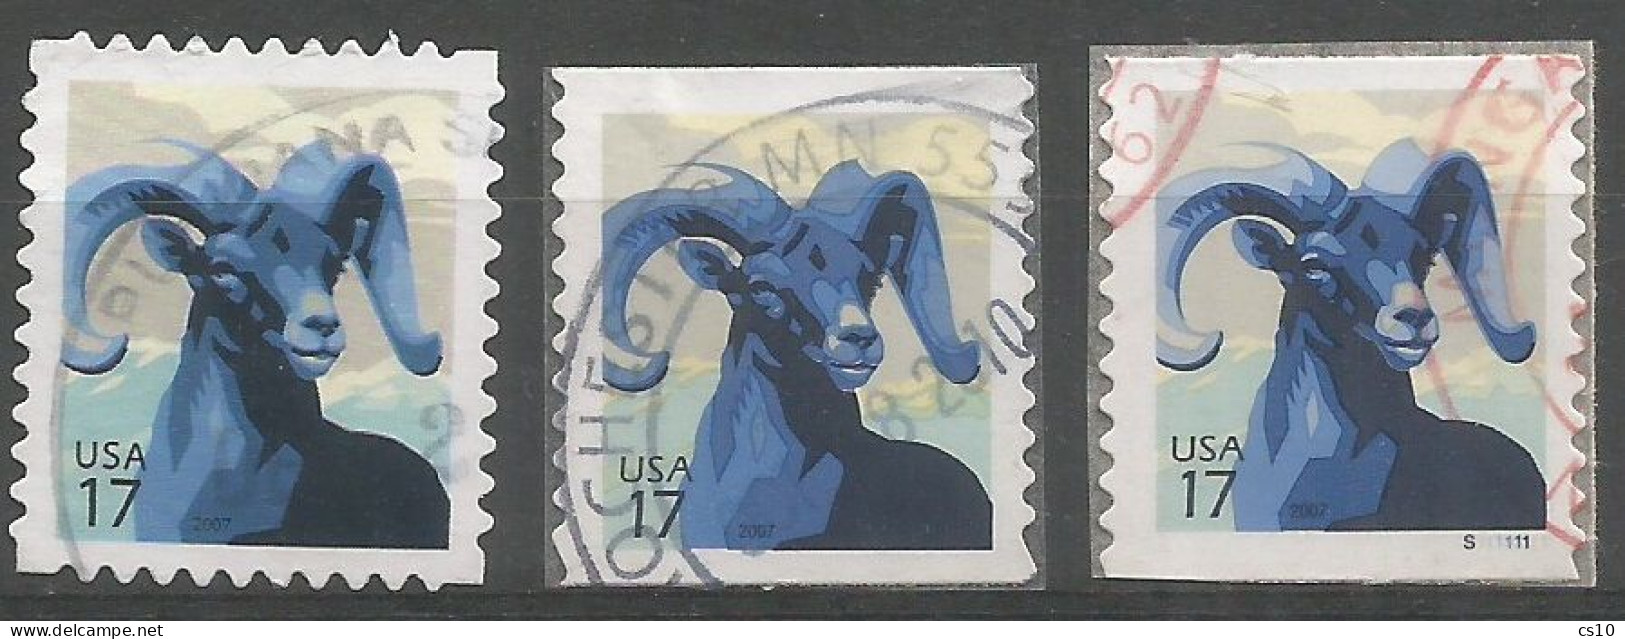 USA 2007 Bighorn Sheep C.17 - SC.#4138 Sheets + SC.#4140 Coil + Coil Plate Number  - Cpl 3v Set In VFU Condition - Rollen (Plaatnummers)